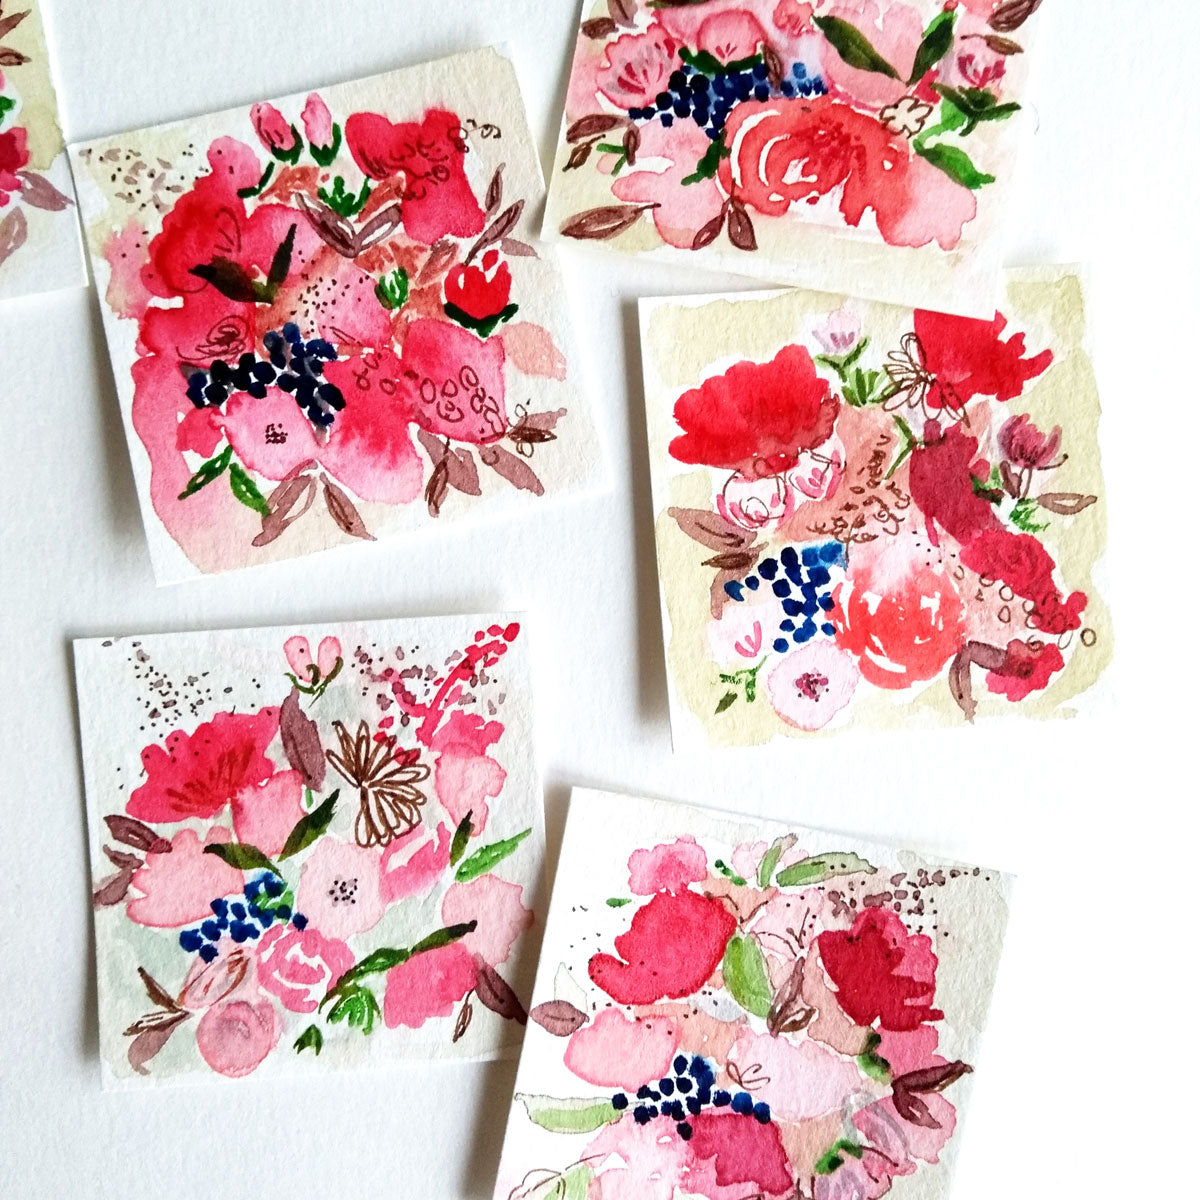 Five Patch Design tiny floral paintings